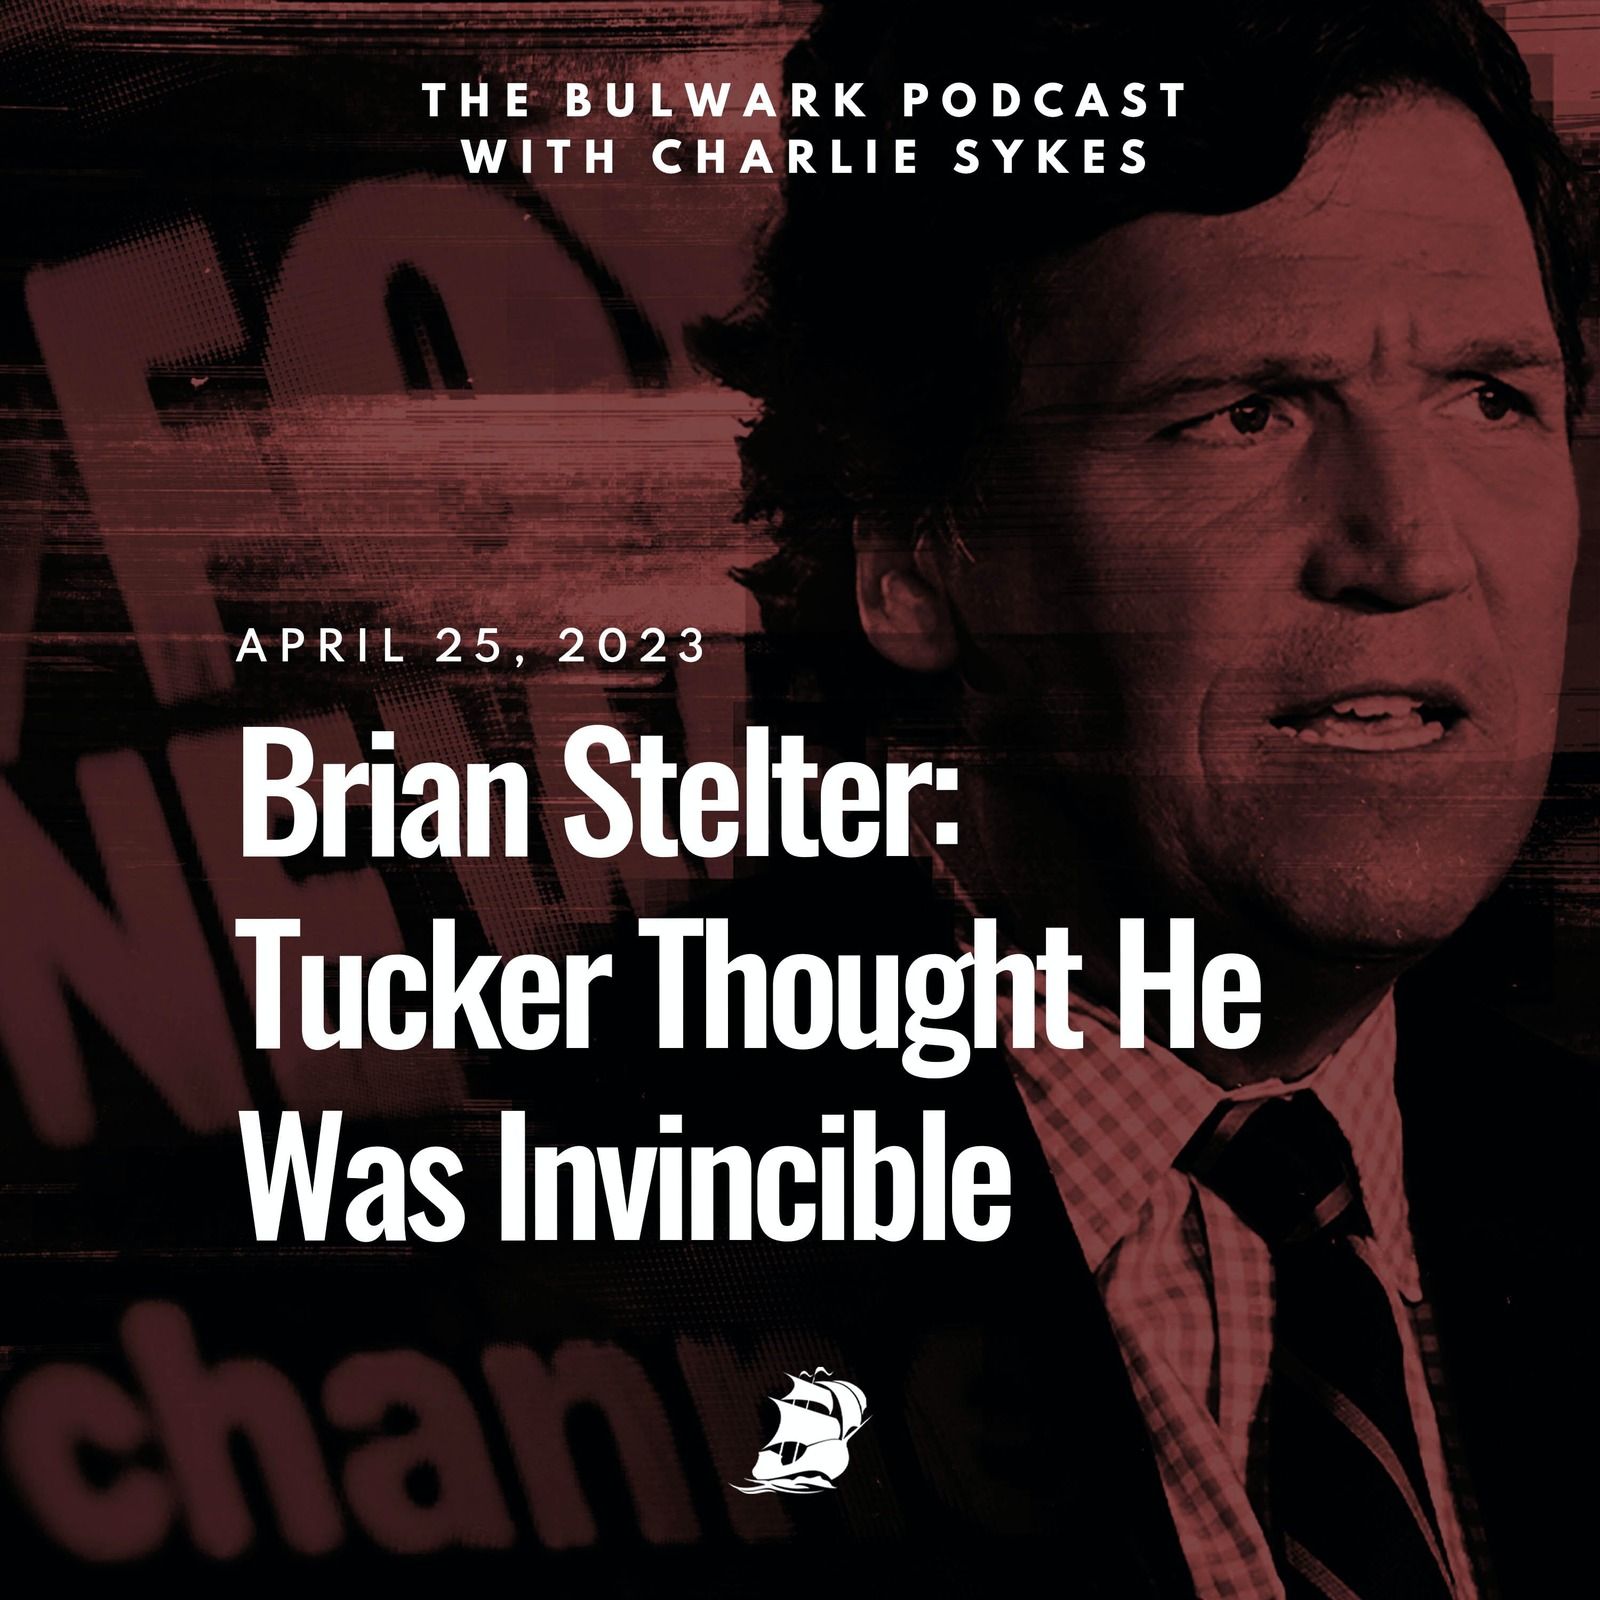 Brian Stelter: Tucker Thought He Was Invincible